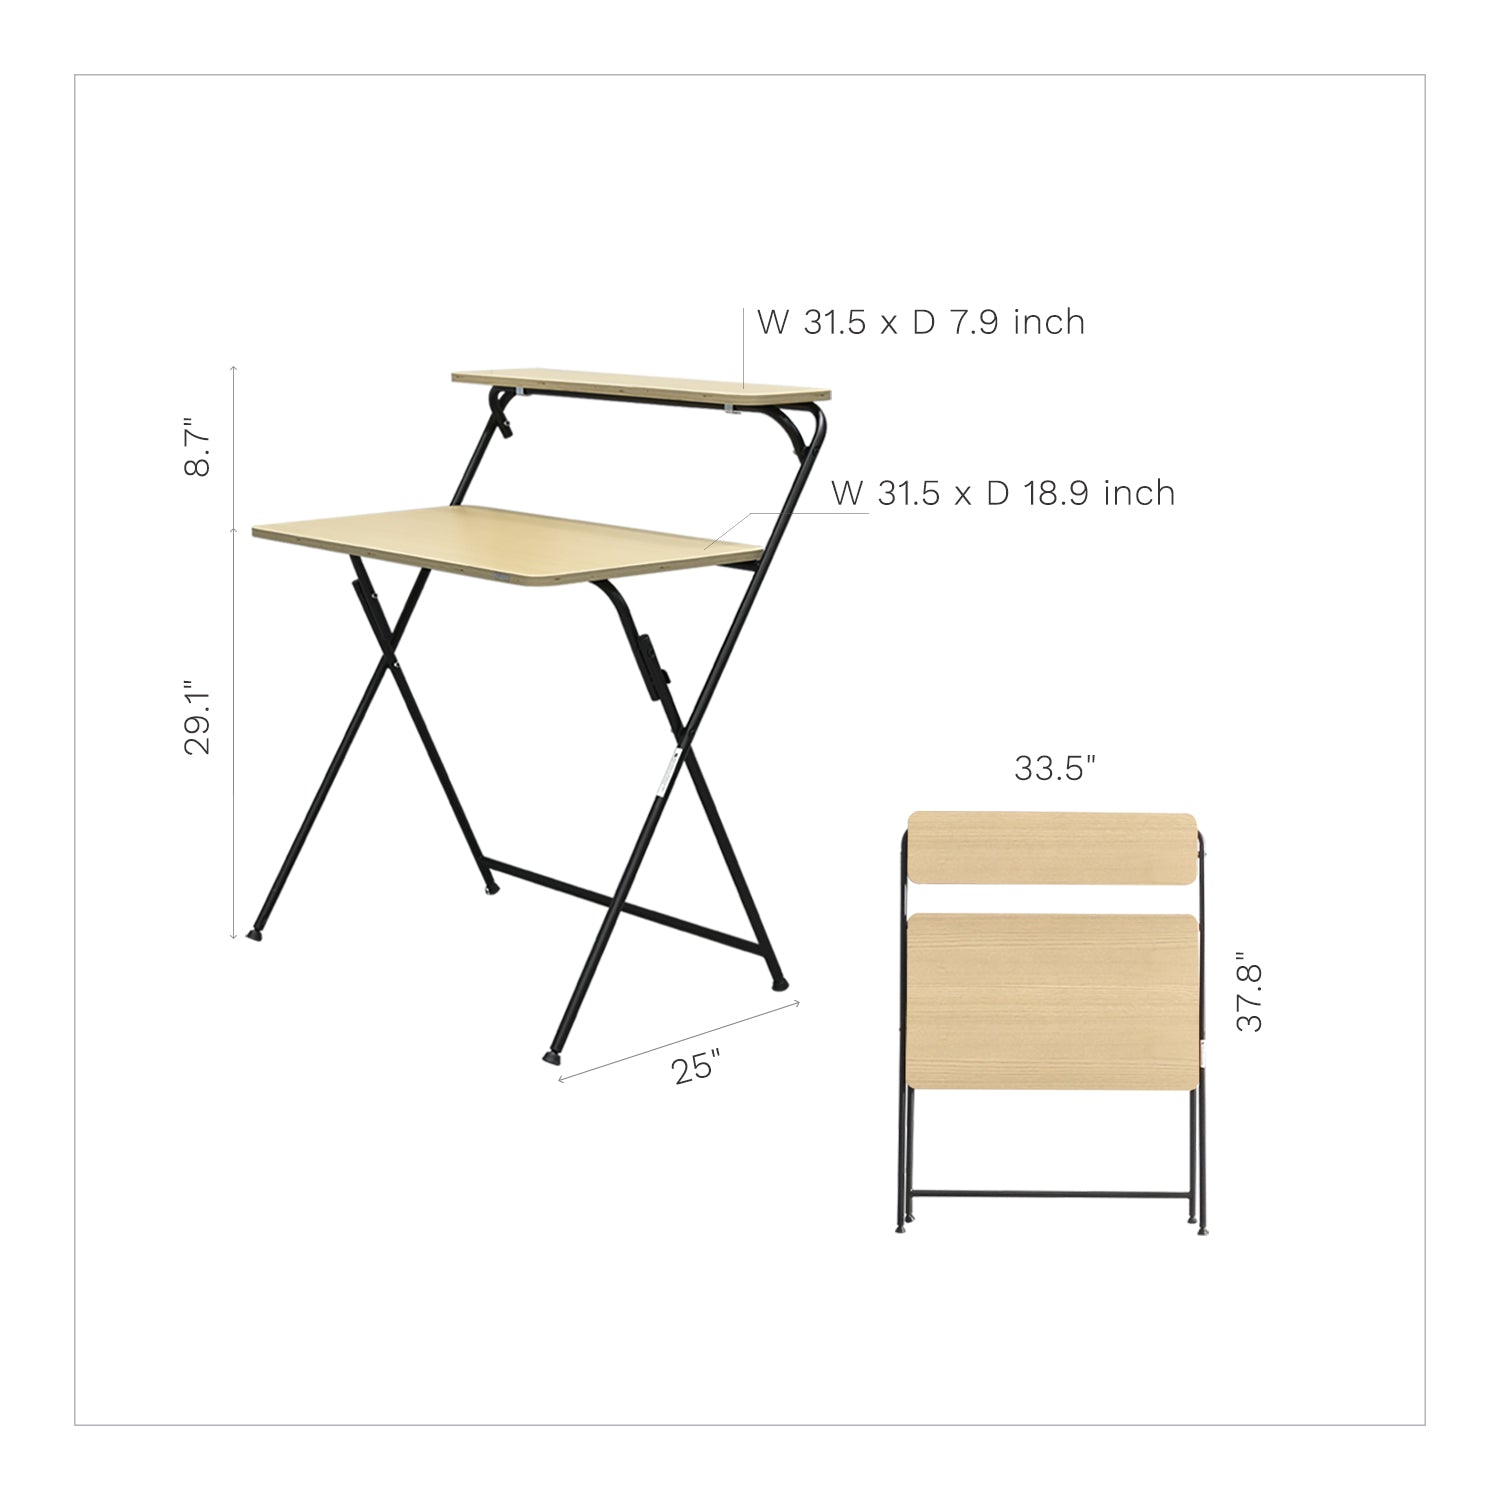 SOFSYS modern industrial two tiered folding desk made with simple 31.5 inch oak table top and minimalist, foldable metal frame